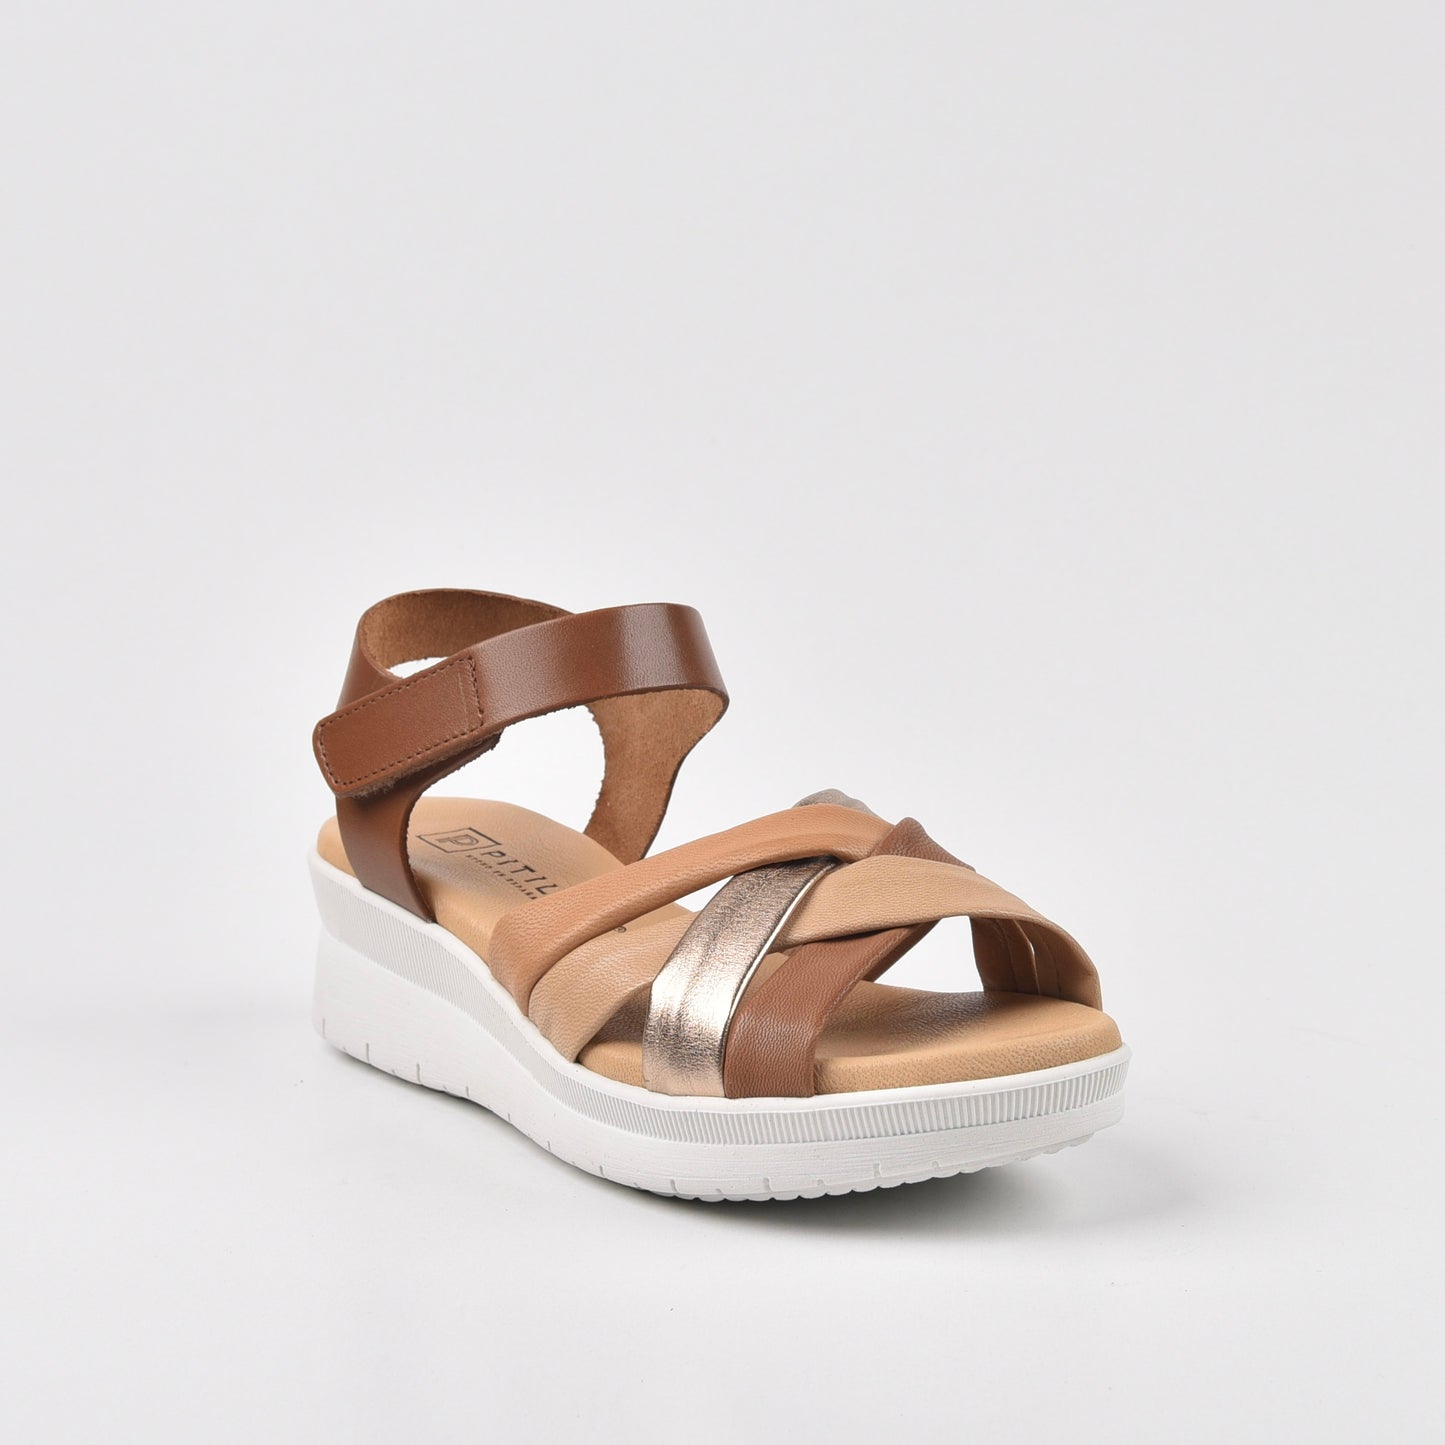 Pitillos Spanish Classic Sandal for Women in Shiny Gold.